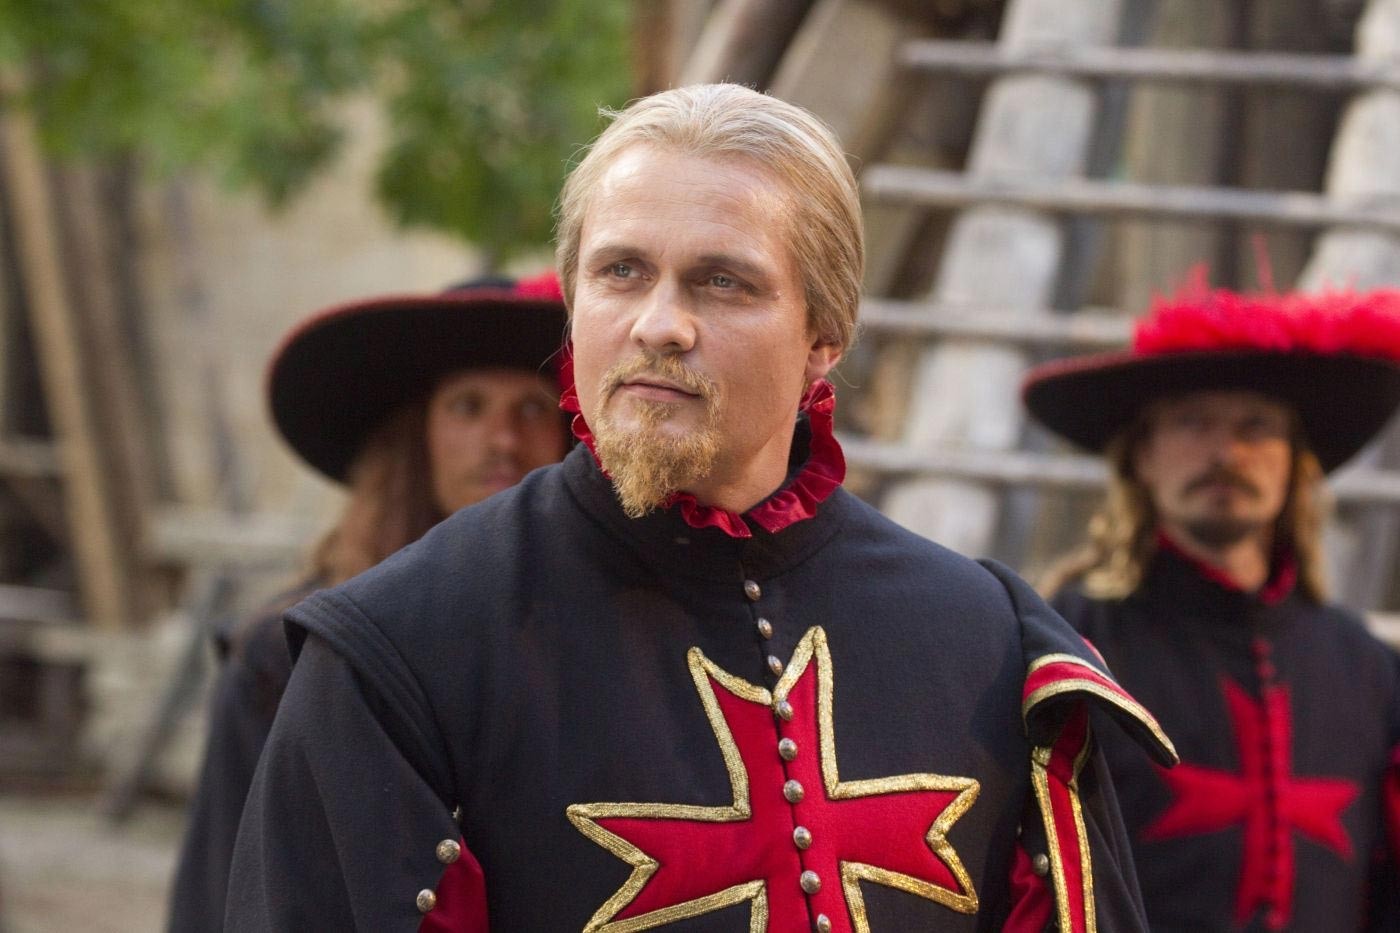 Carsten Norgaard stars as Jussac in Summit Entertainment's The Three Musketeers (2011)